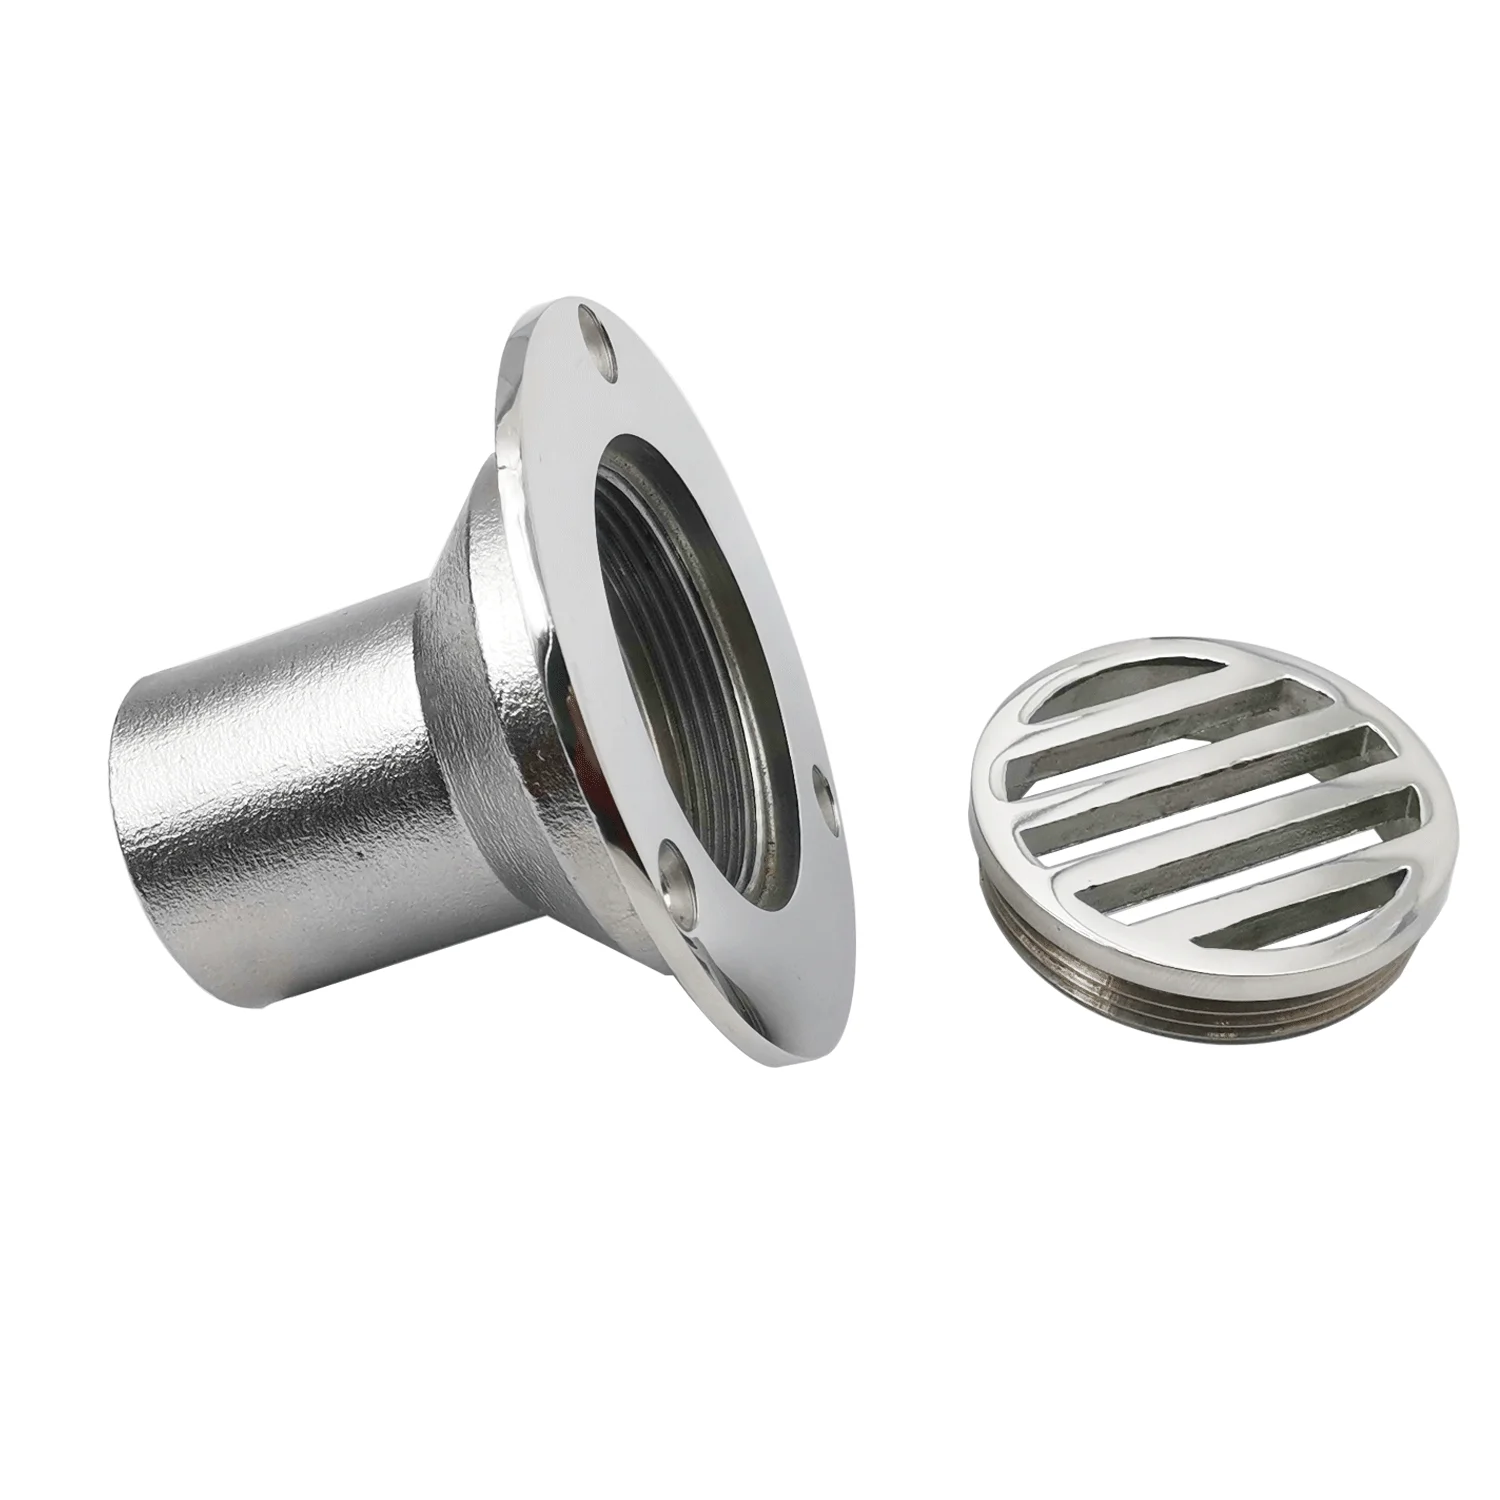 38mm (1.5 Inch ) Marine Grade Stainless Steel 316 Boat Floor Deck Drain for Boat Yacht Deck Drainage Hardware Rowing Accessories enlarge